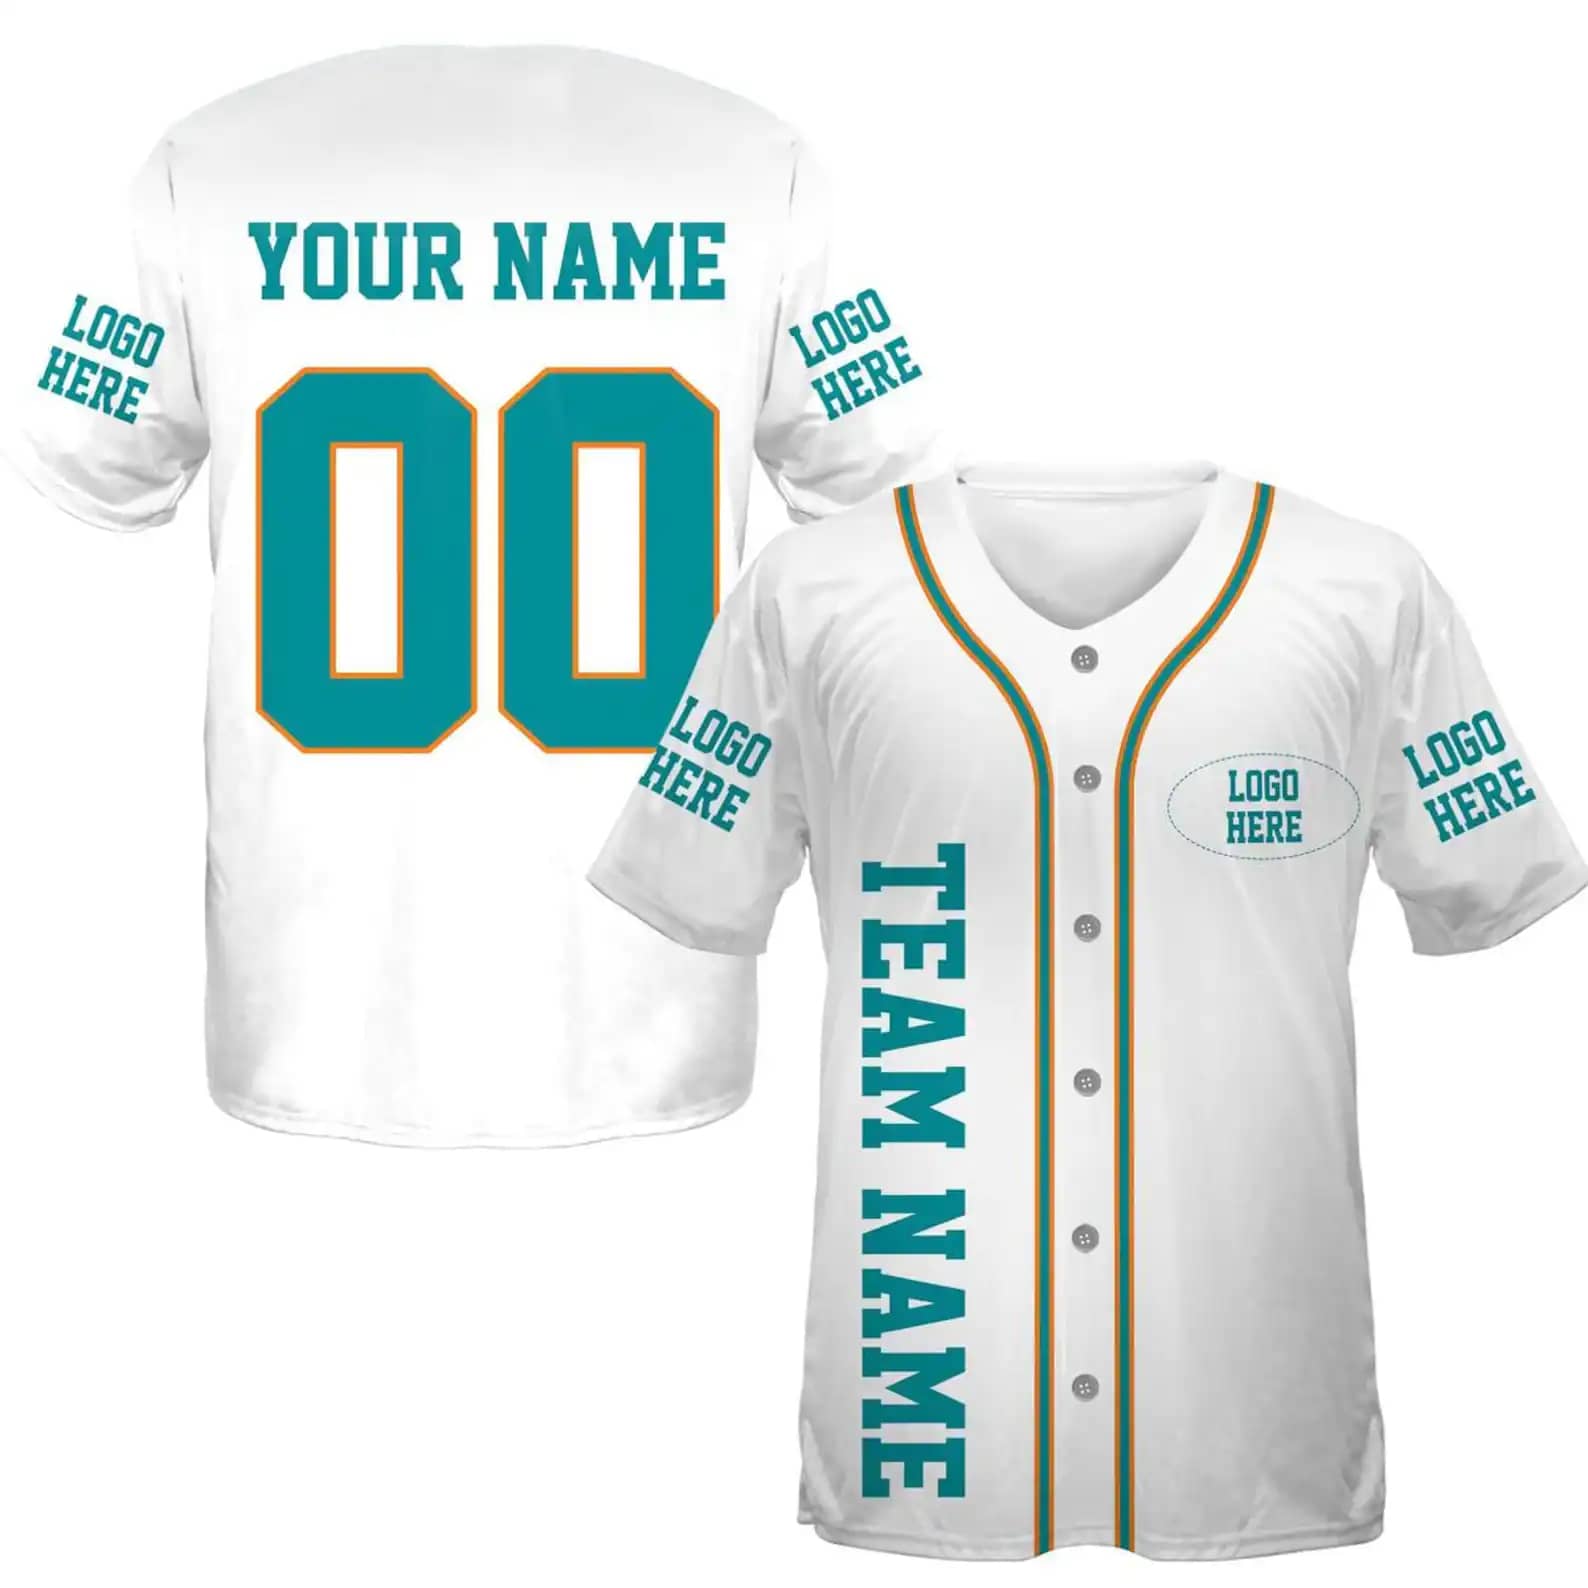 Personalized Miami Football Team Idea Gift For Fans Baseball Jersey